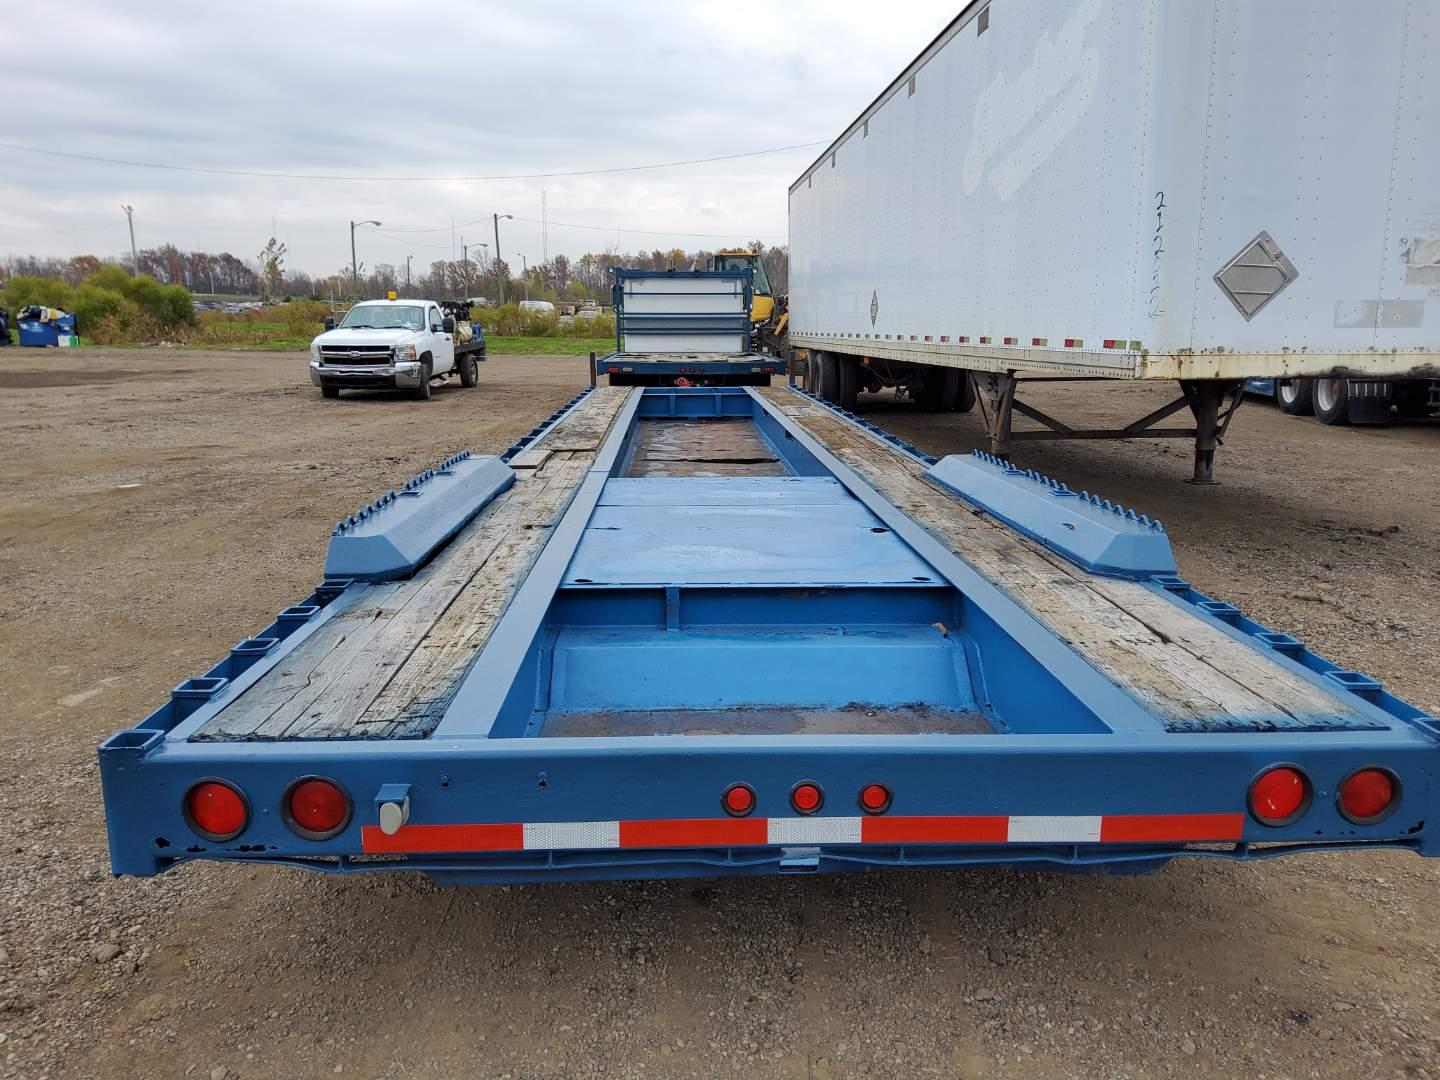 2006 STERLING LC CAR HAULER Serial Number: 2FZHCMCV06AX05728